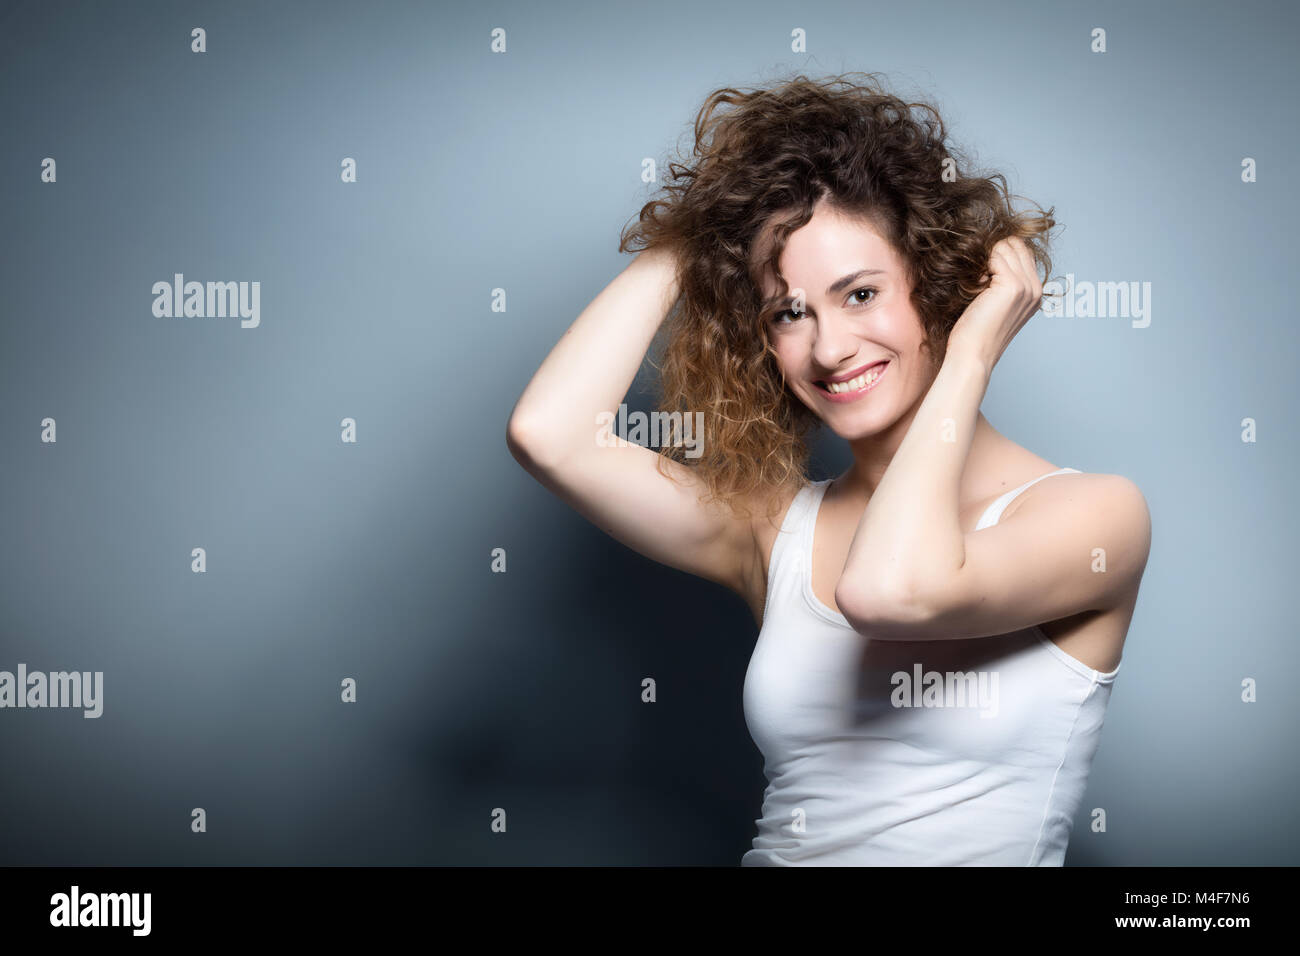 Young smiling woman holding her curly hair up. Stock Photo